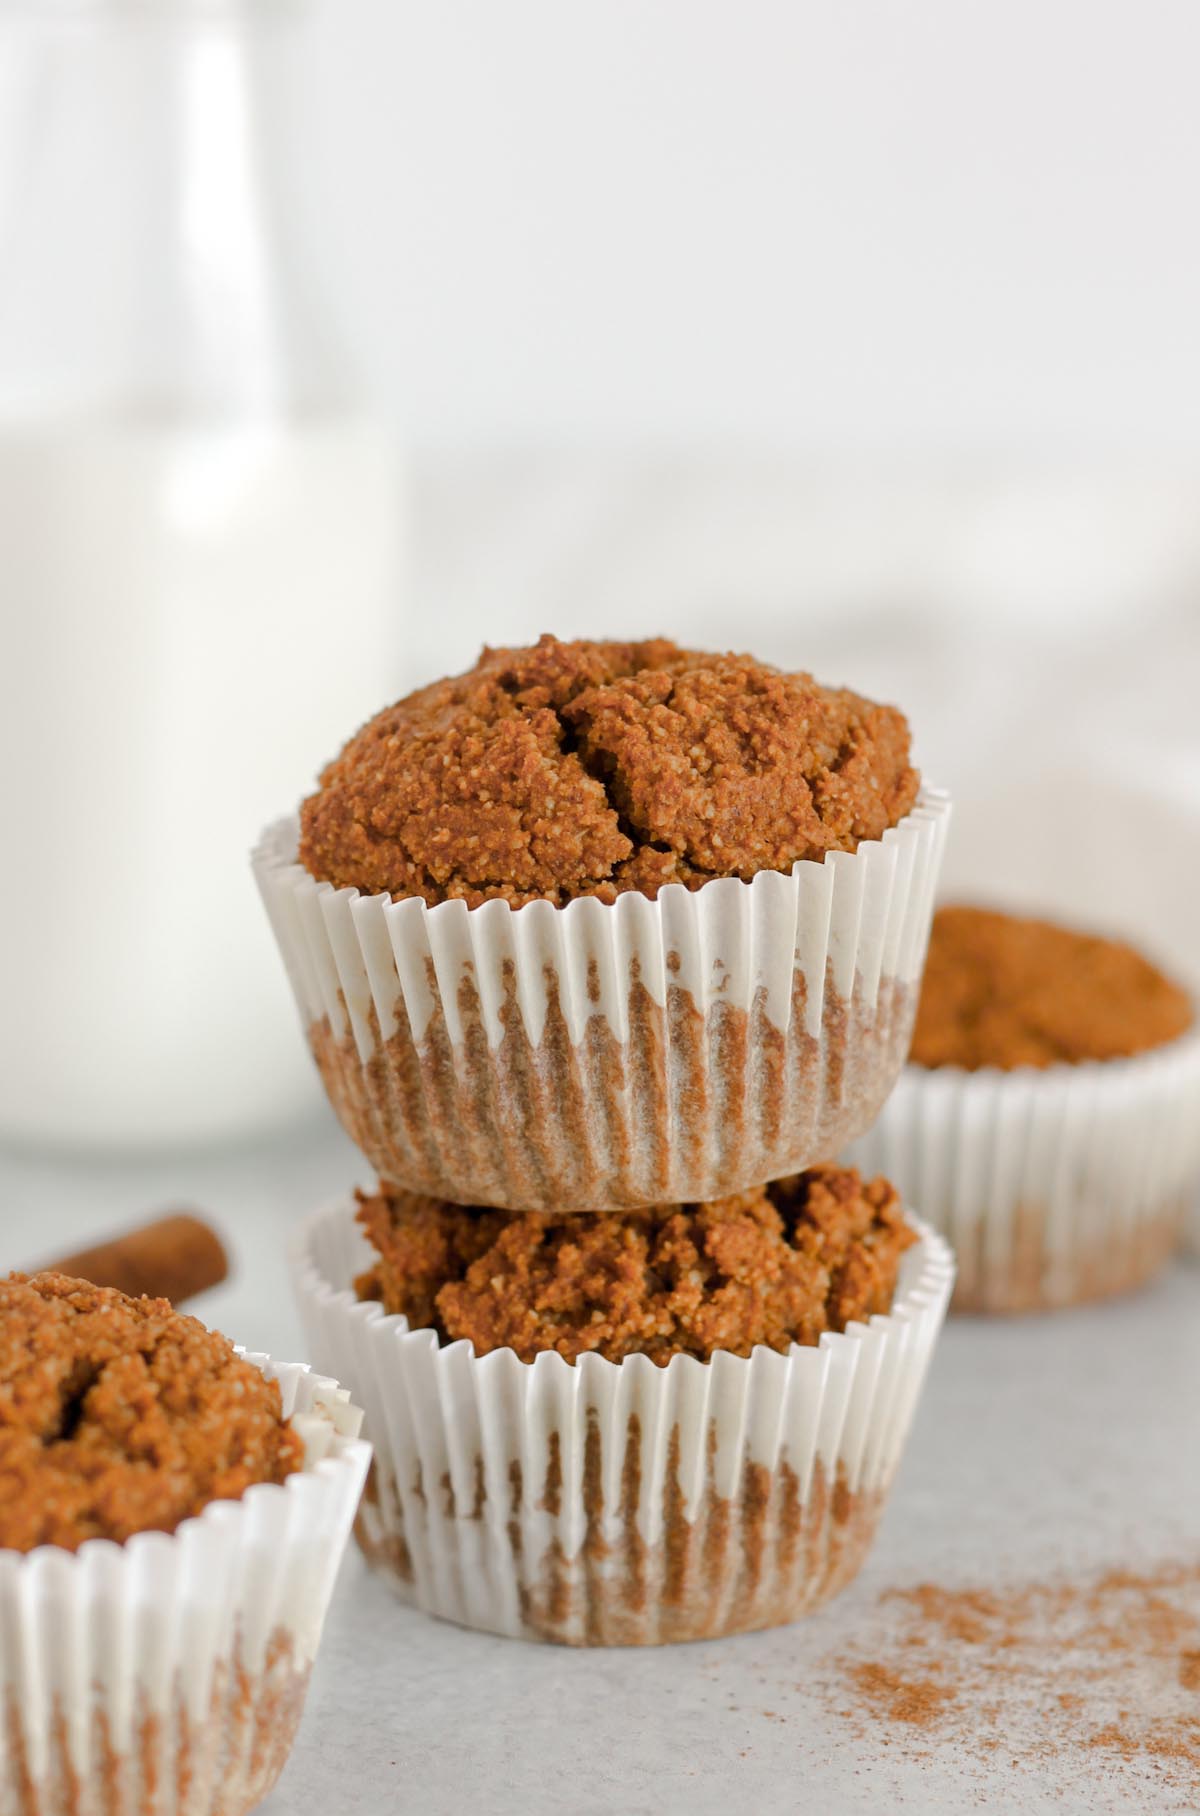 Paleo pumpkin muffins stacked two high with a jar of milk and additional muffins in the background.